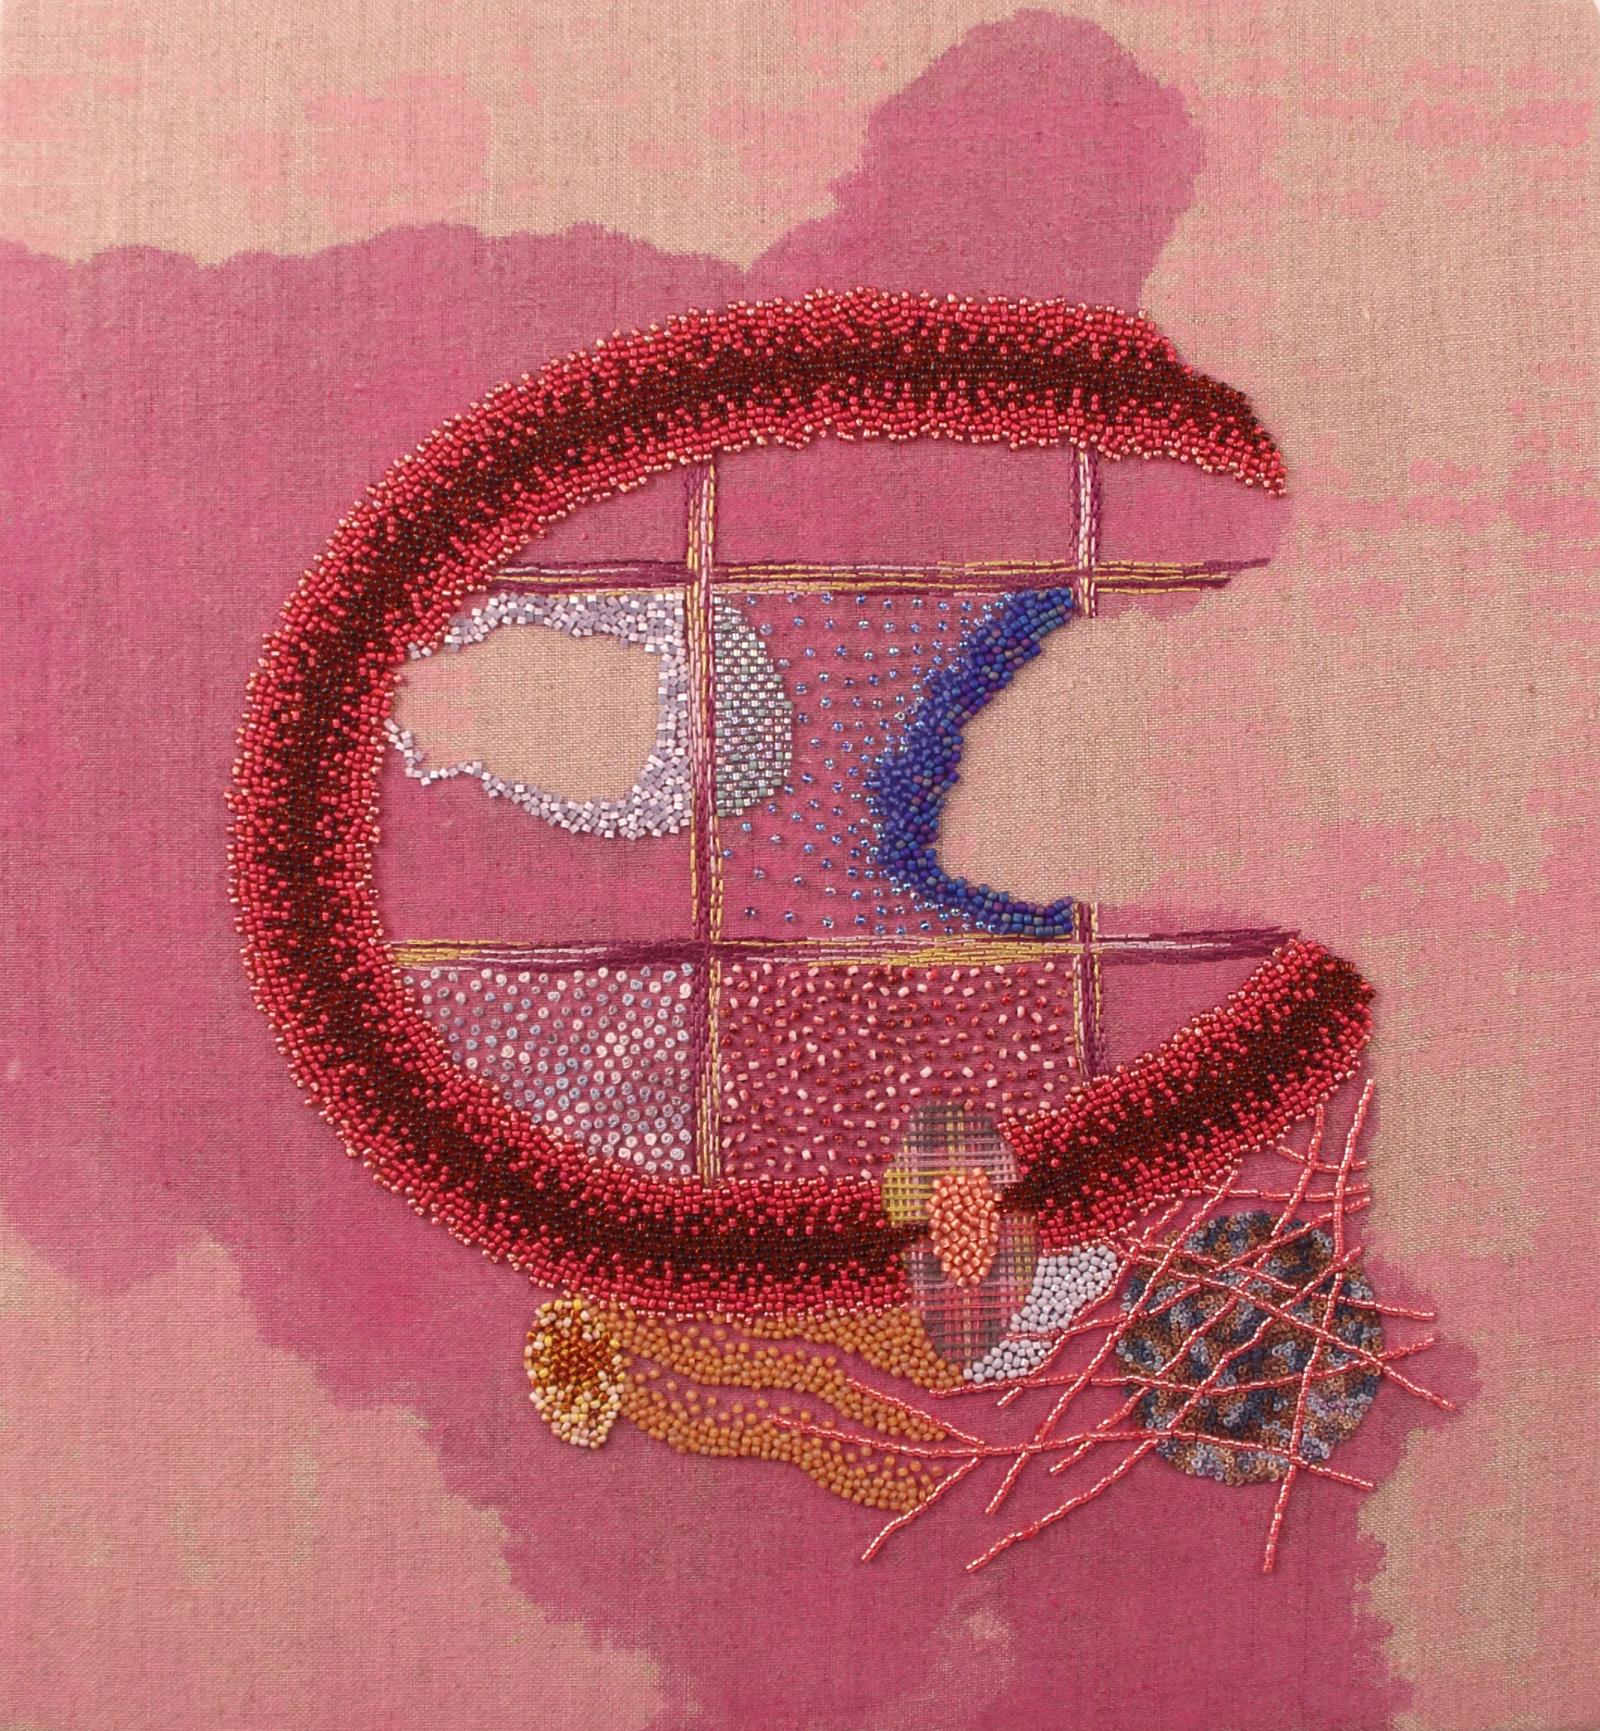 Hand embroidery, beadwork and acrylic paint on linen. Framed.